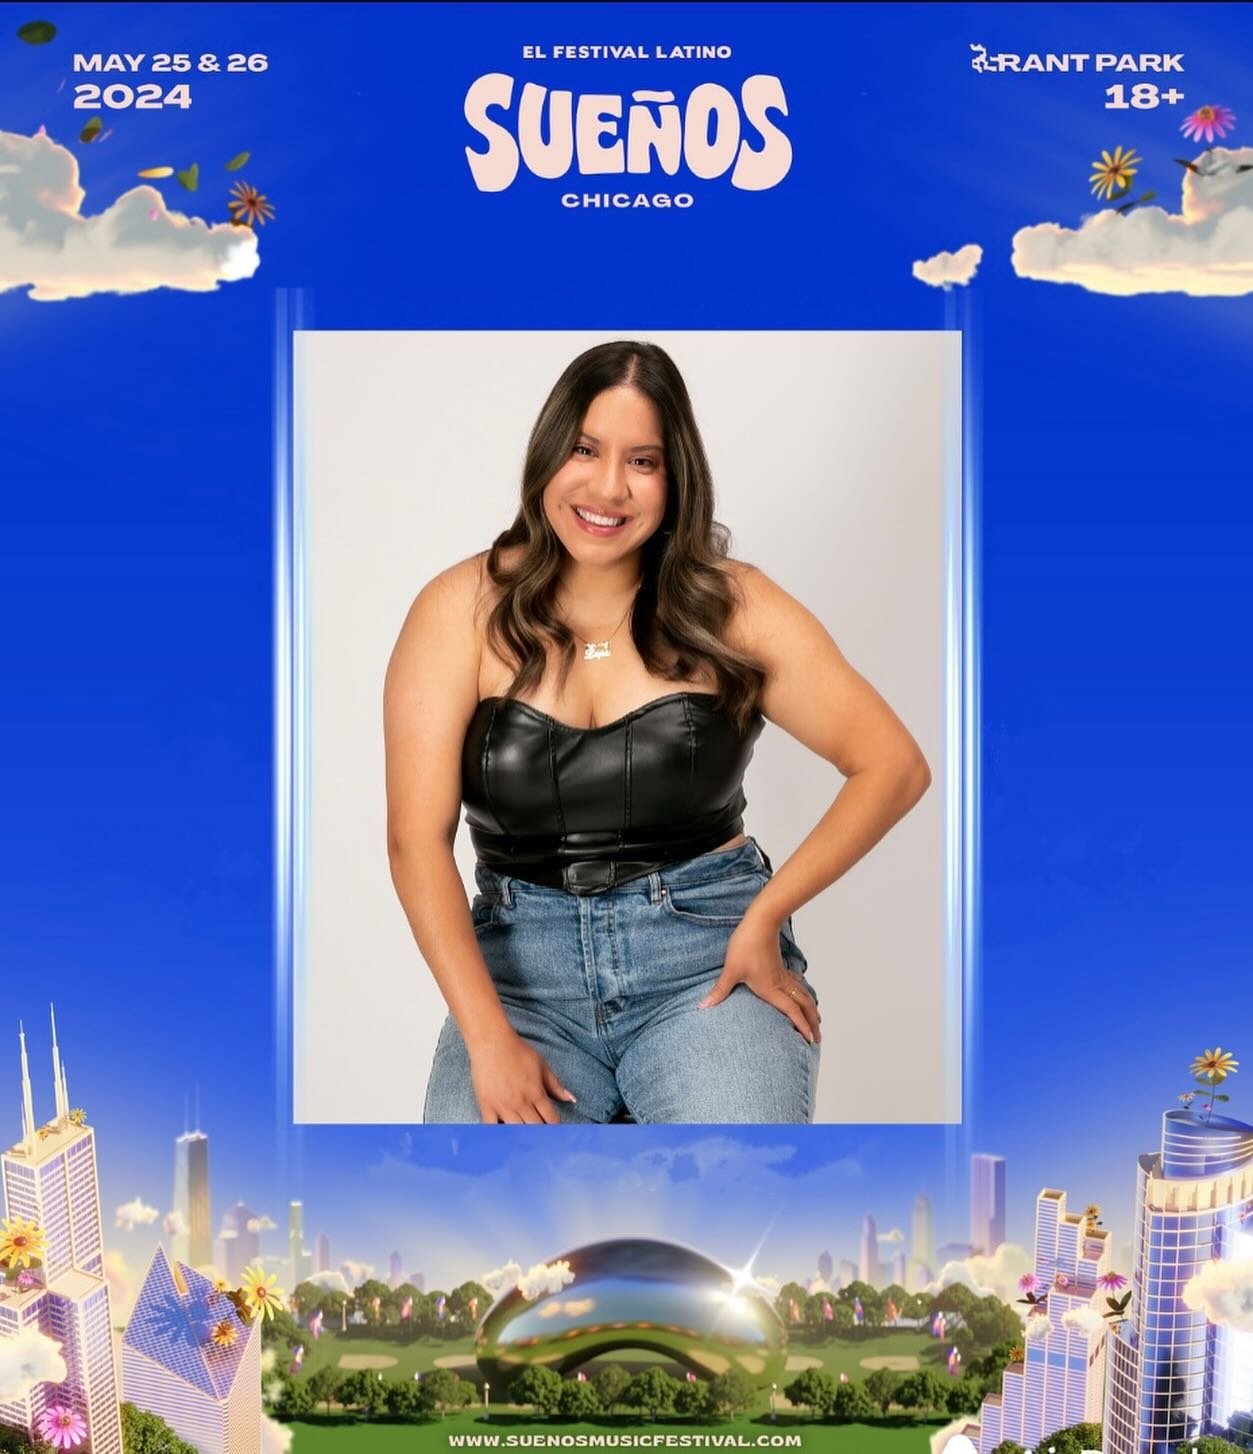 CHICAGO, see you next weekend for @suenosfestival 🤩 So excited to be covering el festival Latino with @rauwalejandro, @pesopluma, @maluma, @ivancornejoo and many more! 🌸